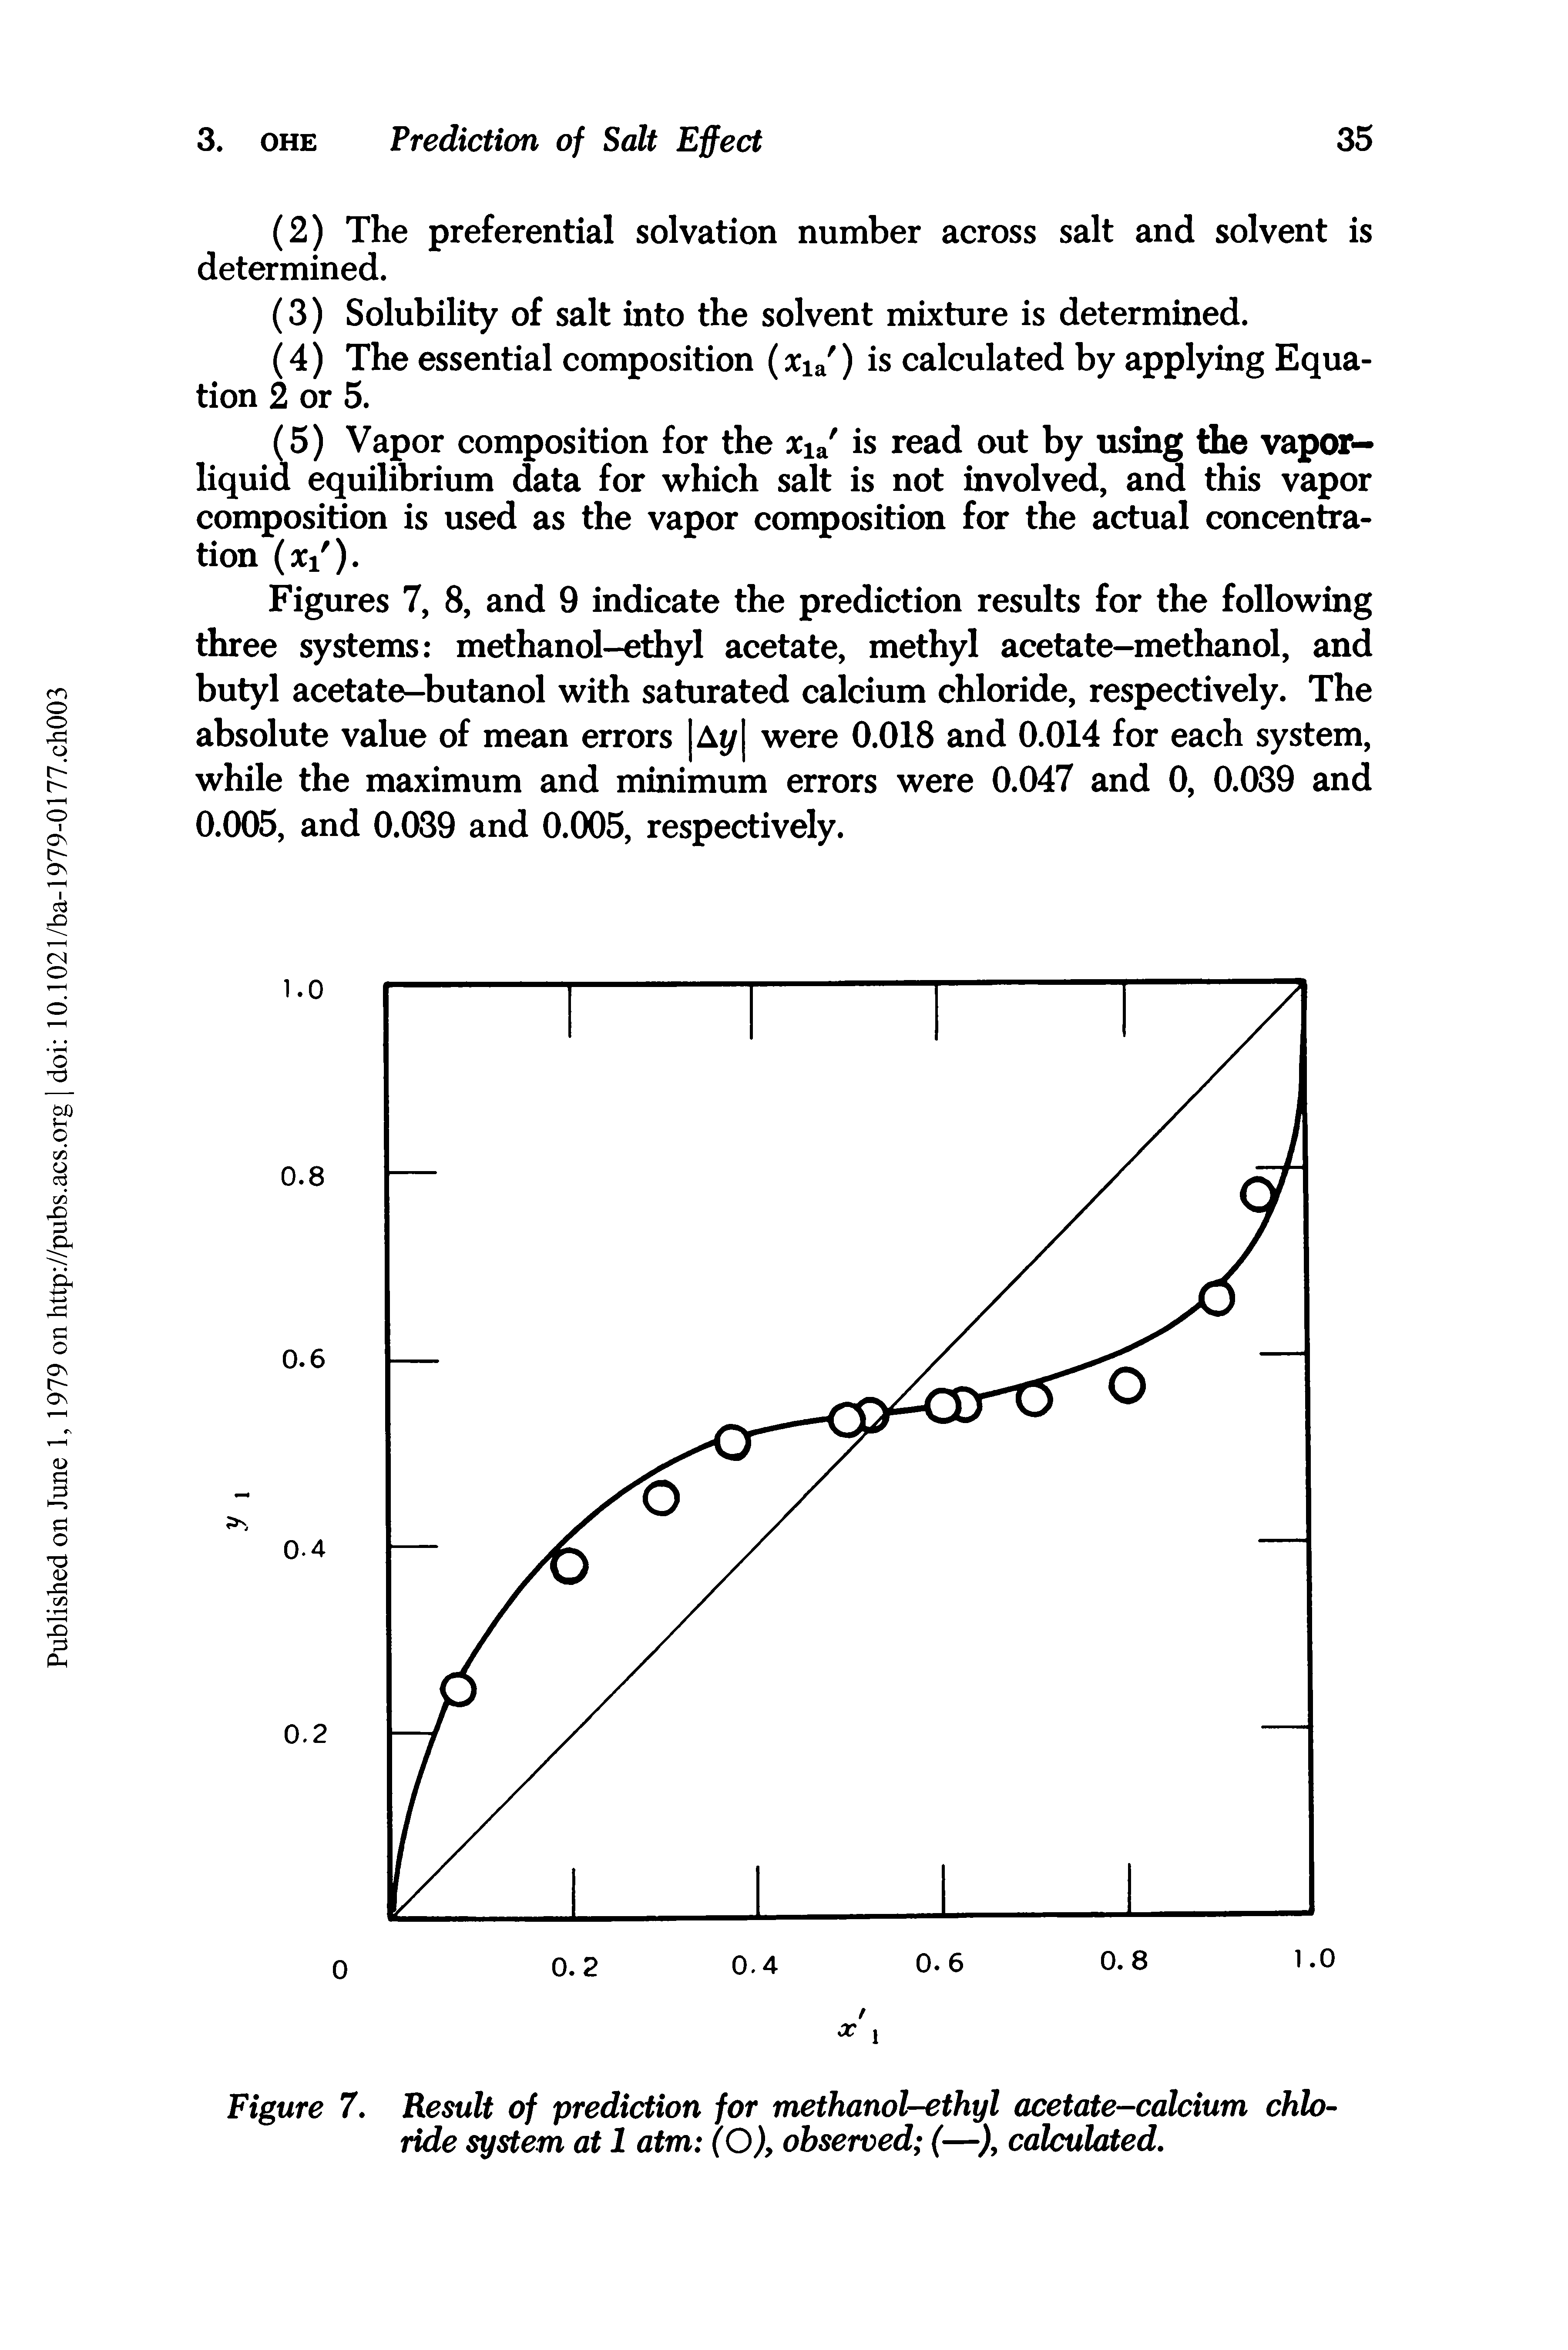 Figures 7, 8, and 9 indicate the prediction results for the following three systems methanol-ethyl acetate, methyl acetate-methanol, and butyl acetate-butanol with saturated calcium chloride, respectively. The absolute value of mean errors At/ were 0.018 and 0.014 for each system, while the maximum and minimum errors were 0.047 and 0, 0.039 and 0.005, and 0.039 and 0.005, respectively.